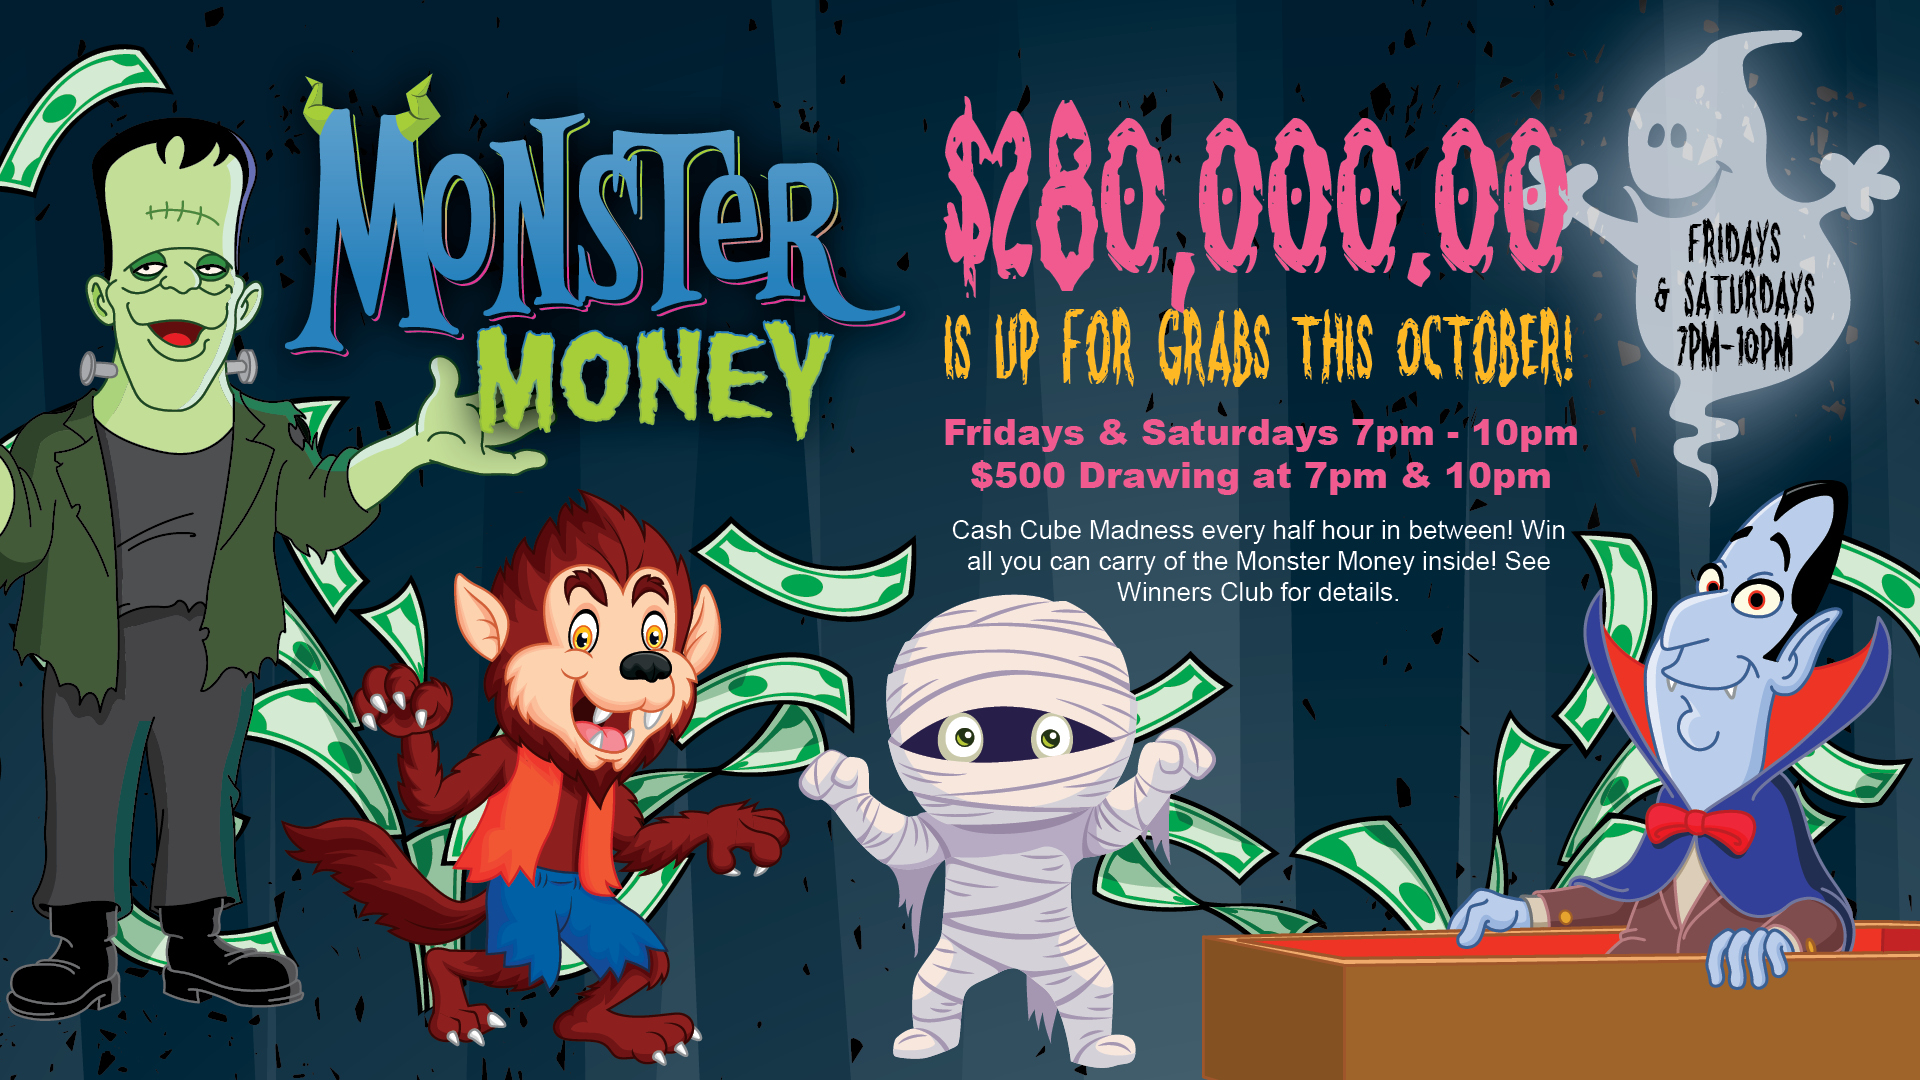 Monster Money - $280,000.00 is up for grabs this October! Fridays & Saturdays 7pm - 10pm $500 drawing at 7pm & 10pm